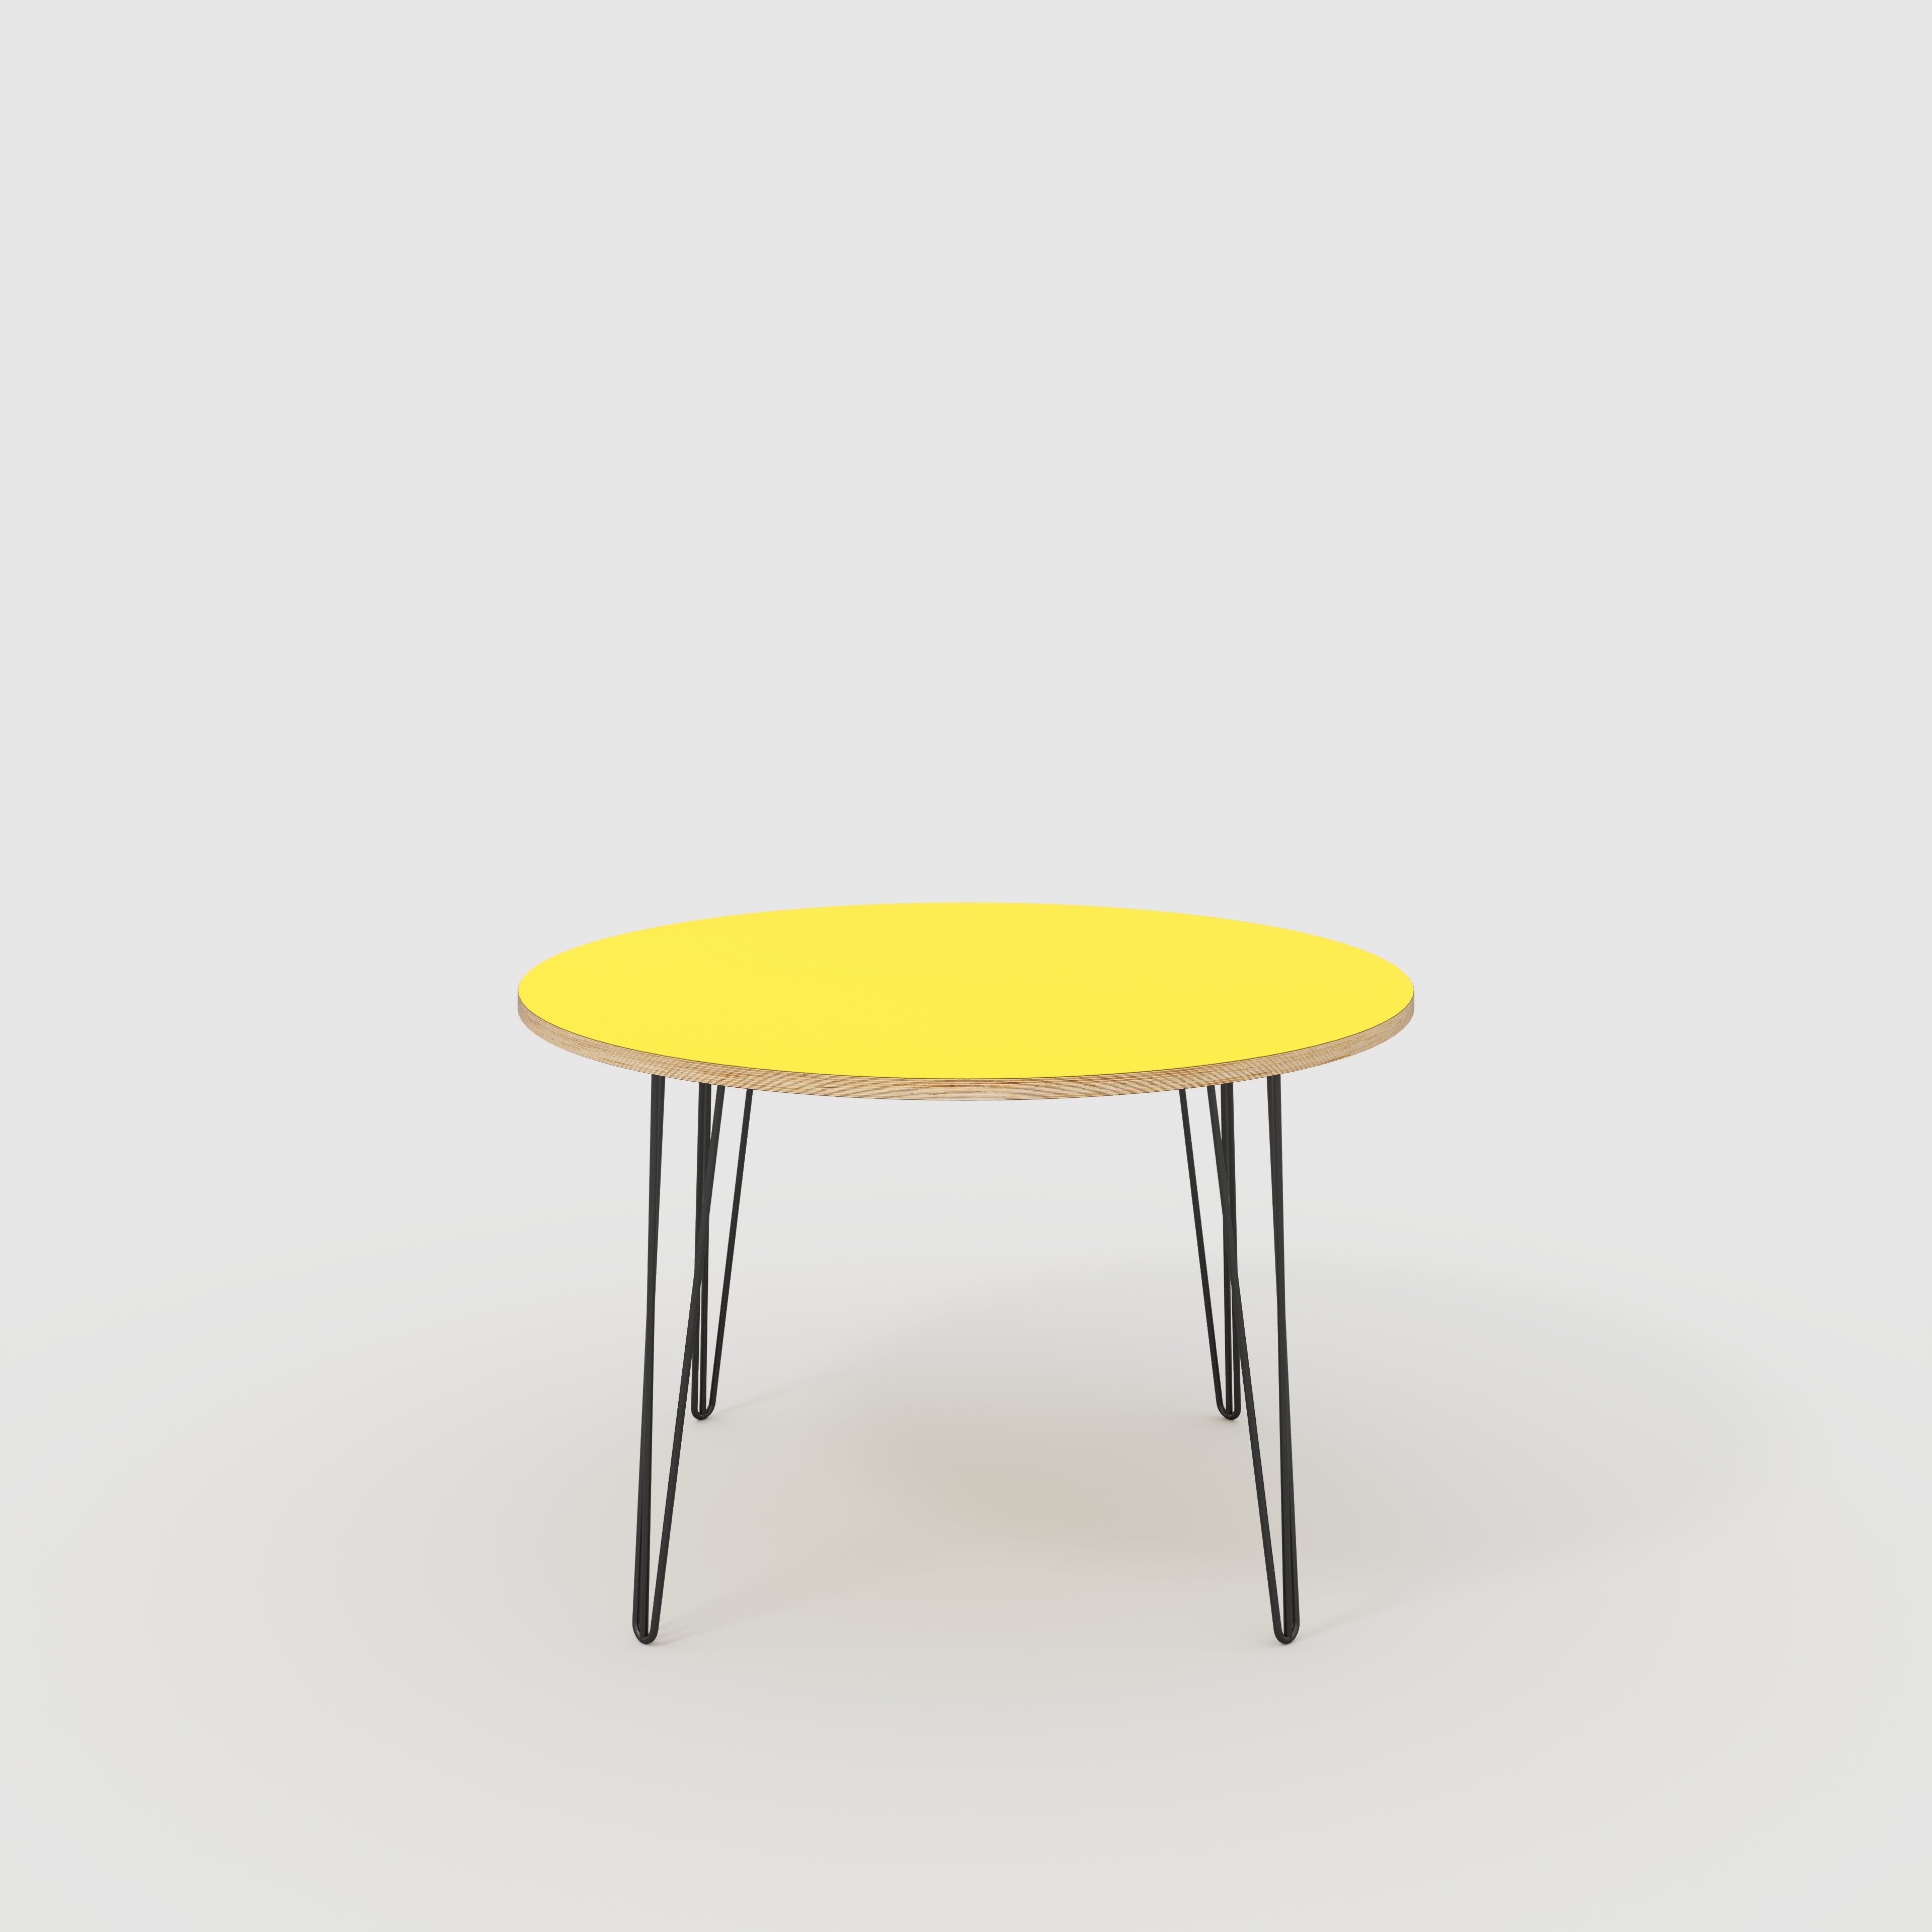 Round Table with Black Hairpin Legs - Formica Chrome Yellow - 1200(dia) x 735(h)